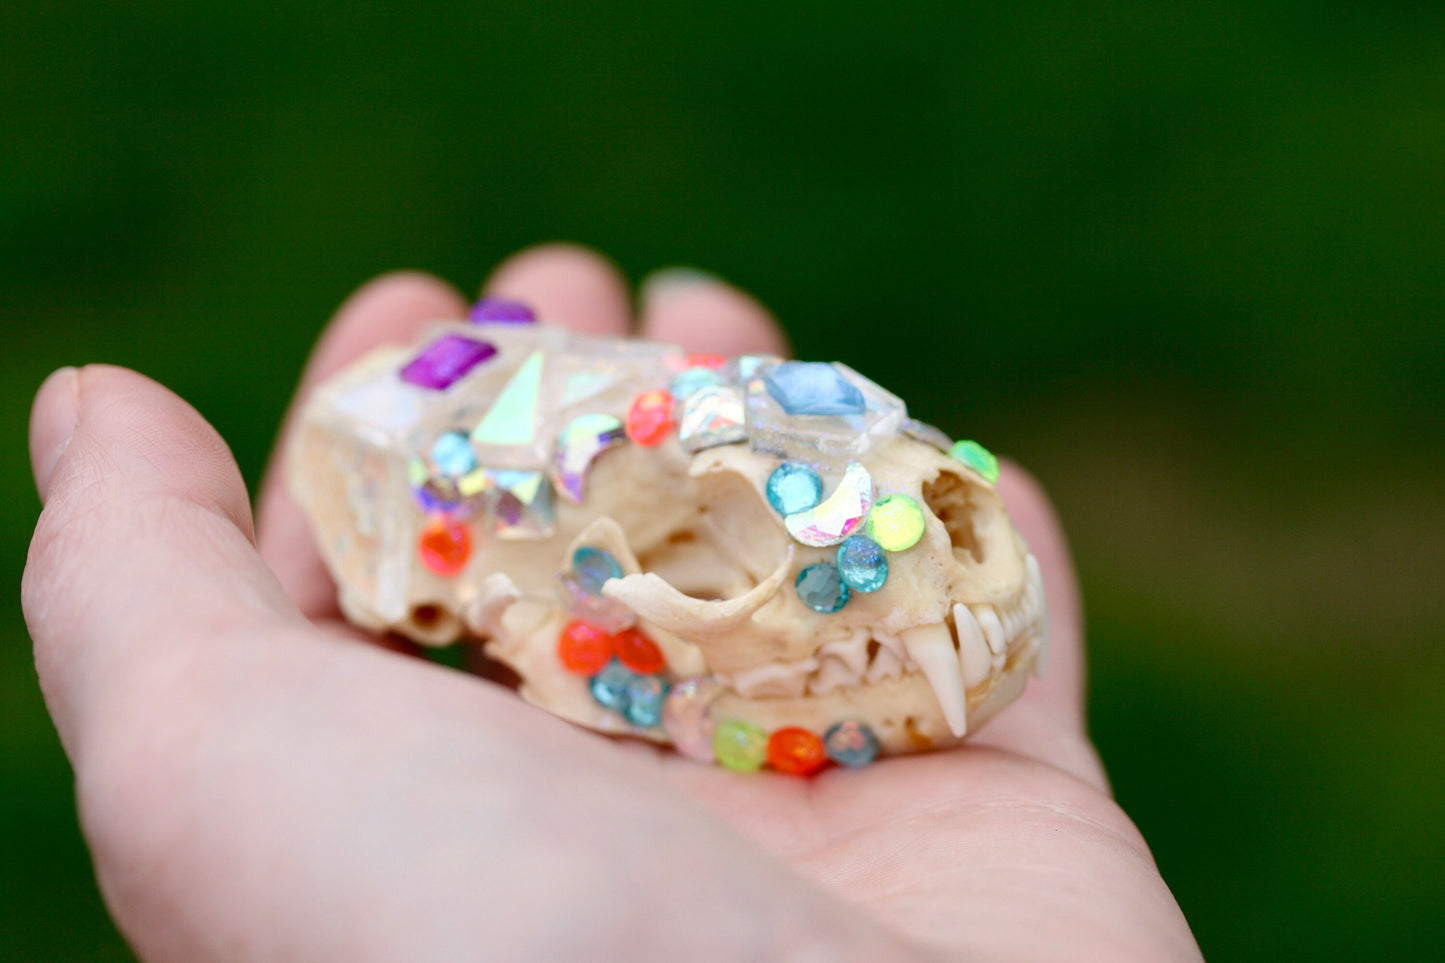 Small Bejeweled Skull- Bedazzled Jeweled Decorated Rainbow Kitsch Decoration Wall Hanging OOAK Craft Sparkly Animal Oddity Taxidermy Occult